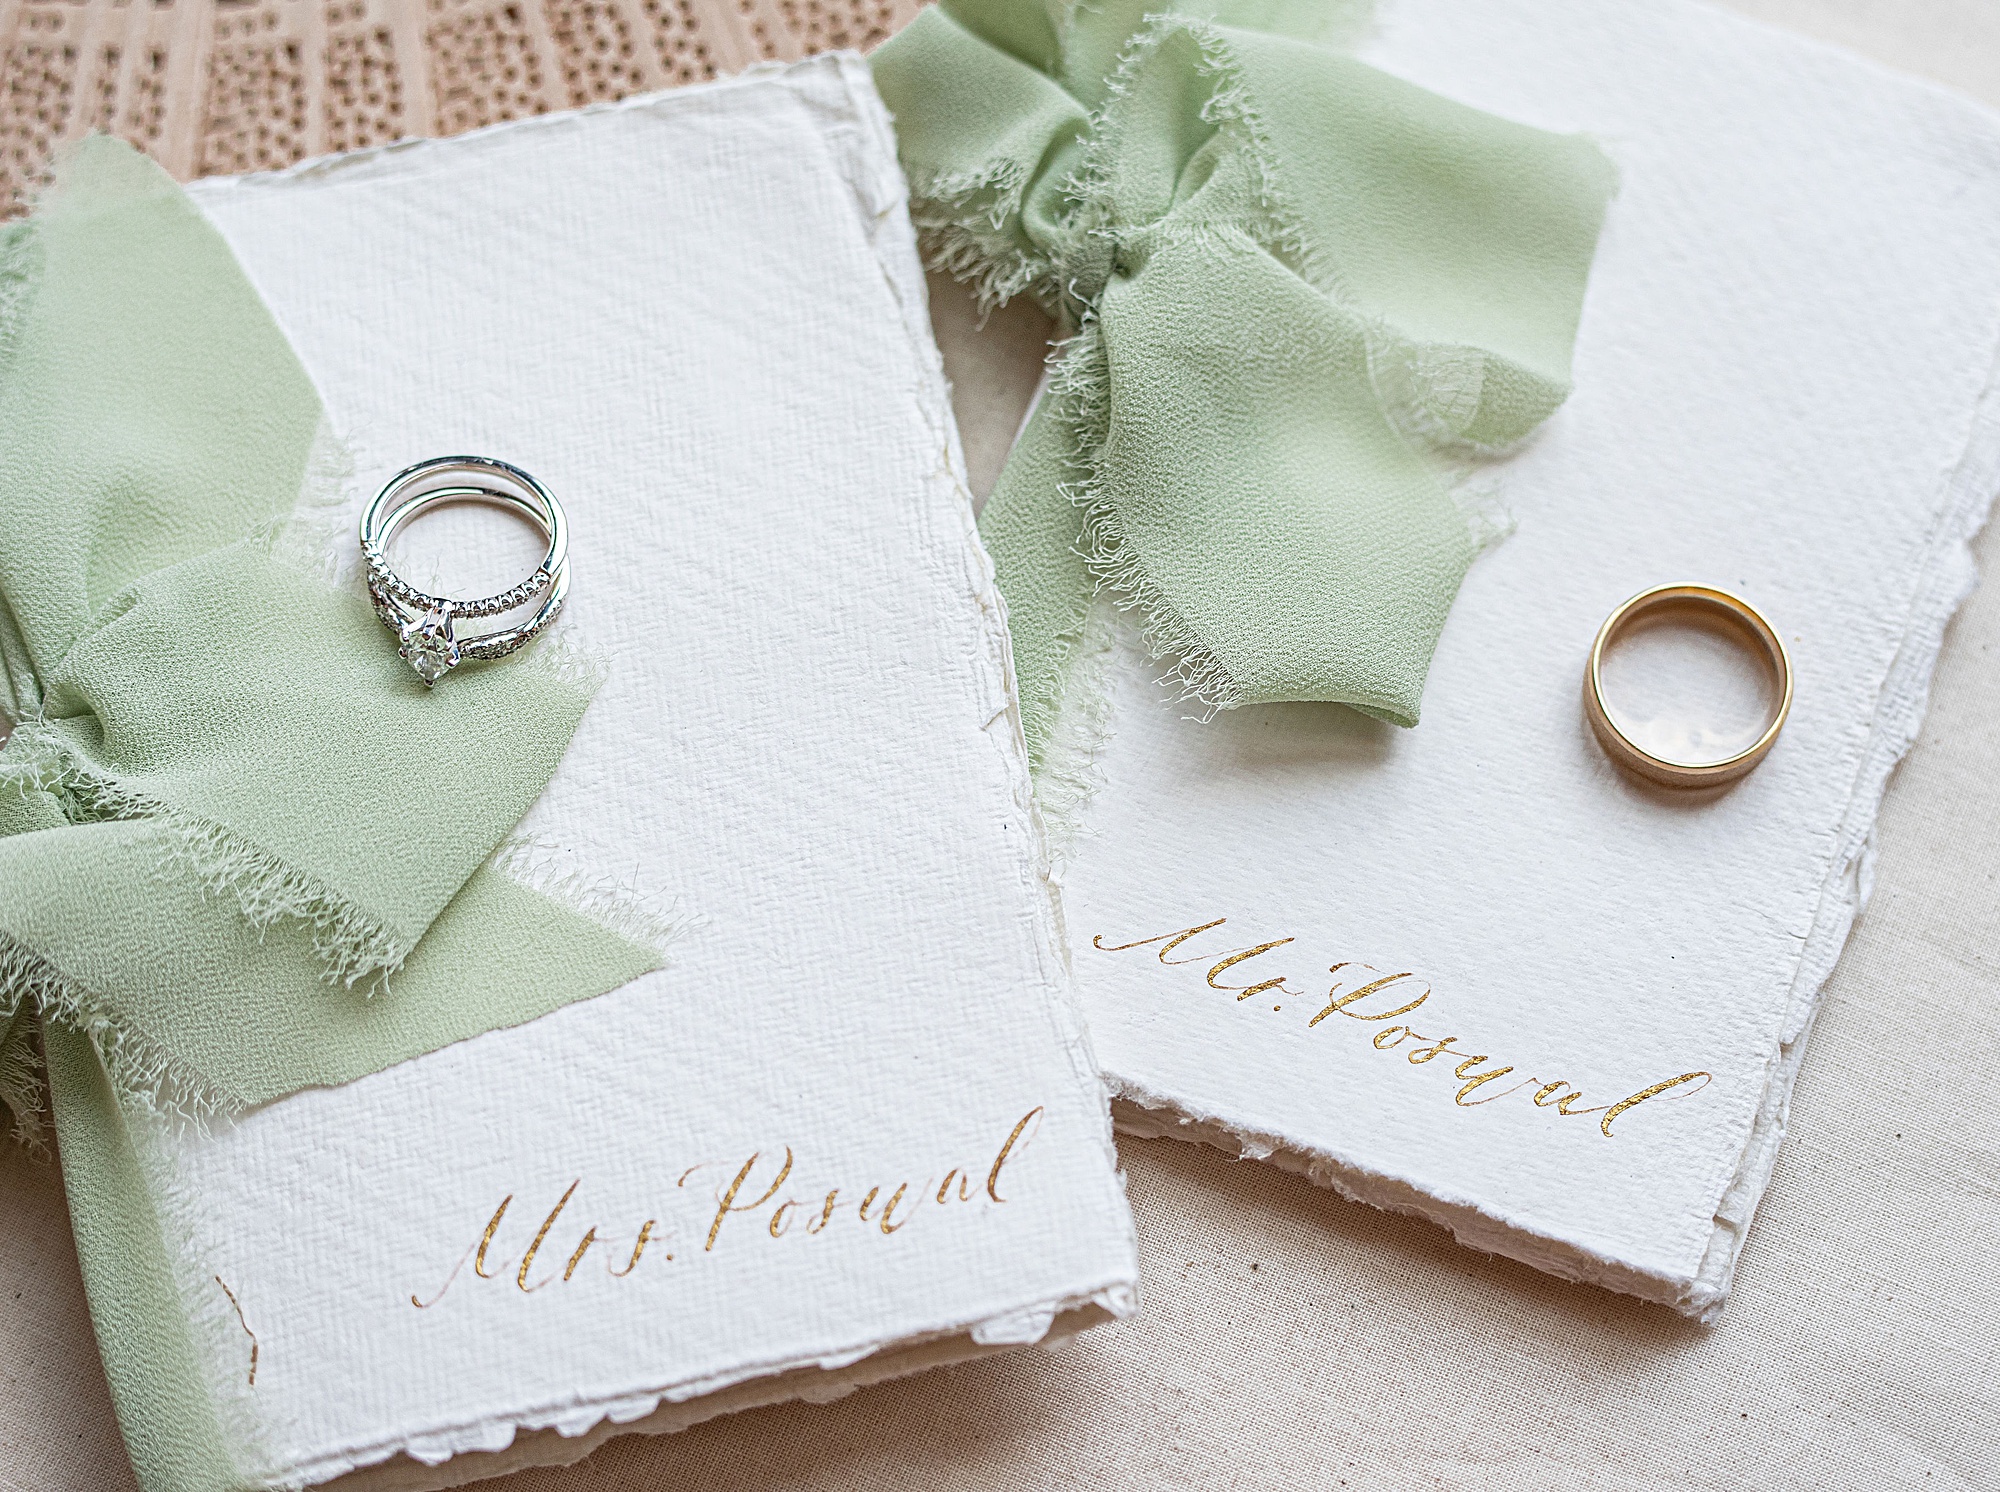 vow booklets and wedding rings for MD wedding